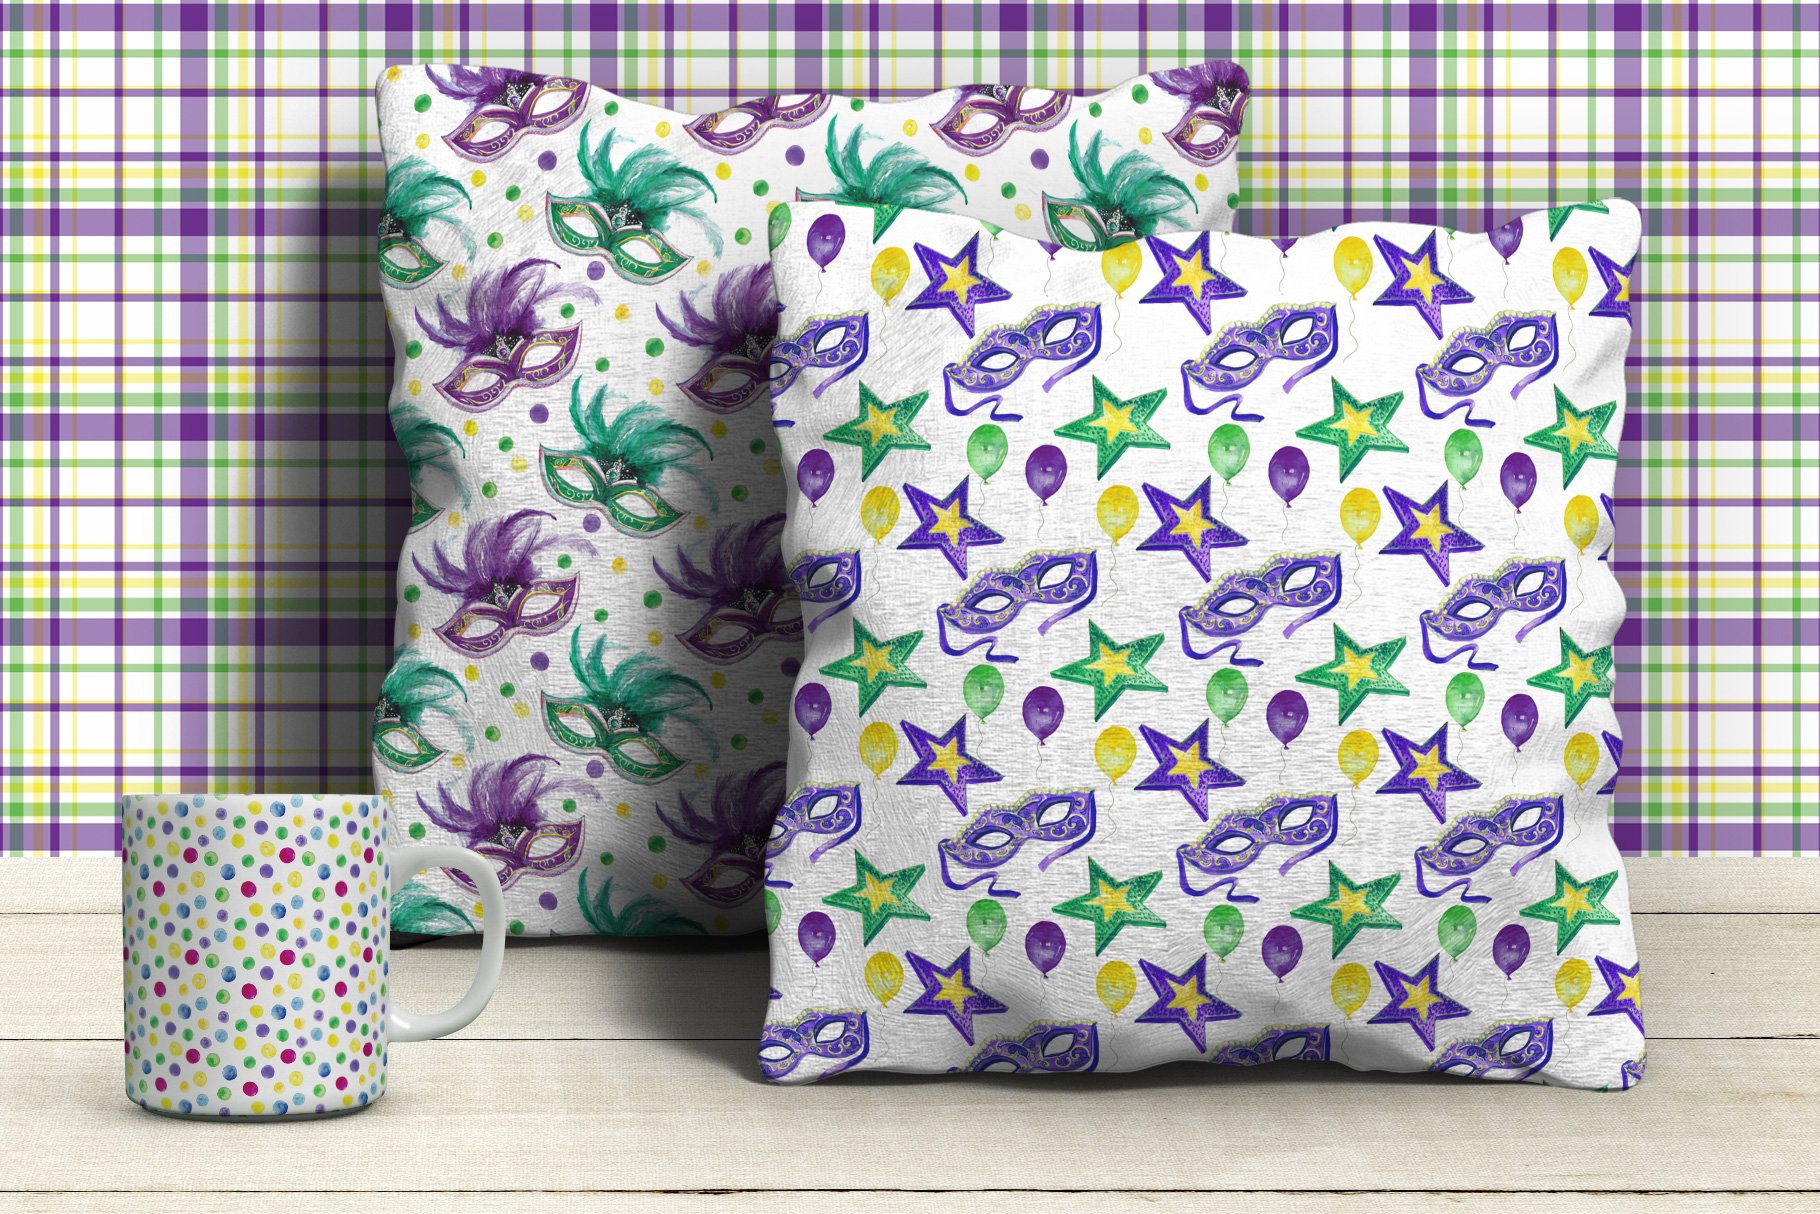 Two pillows with the small carnival elements.